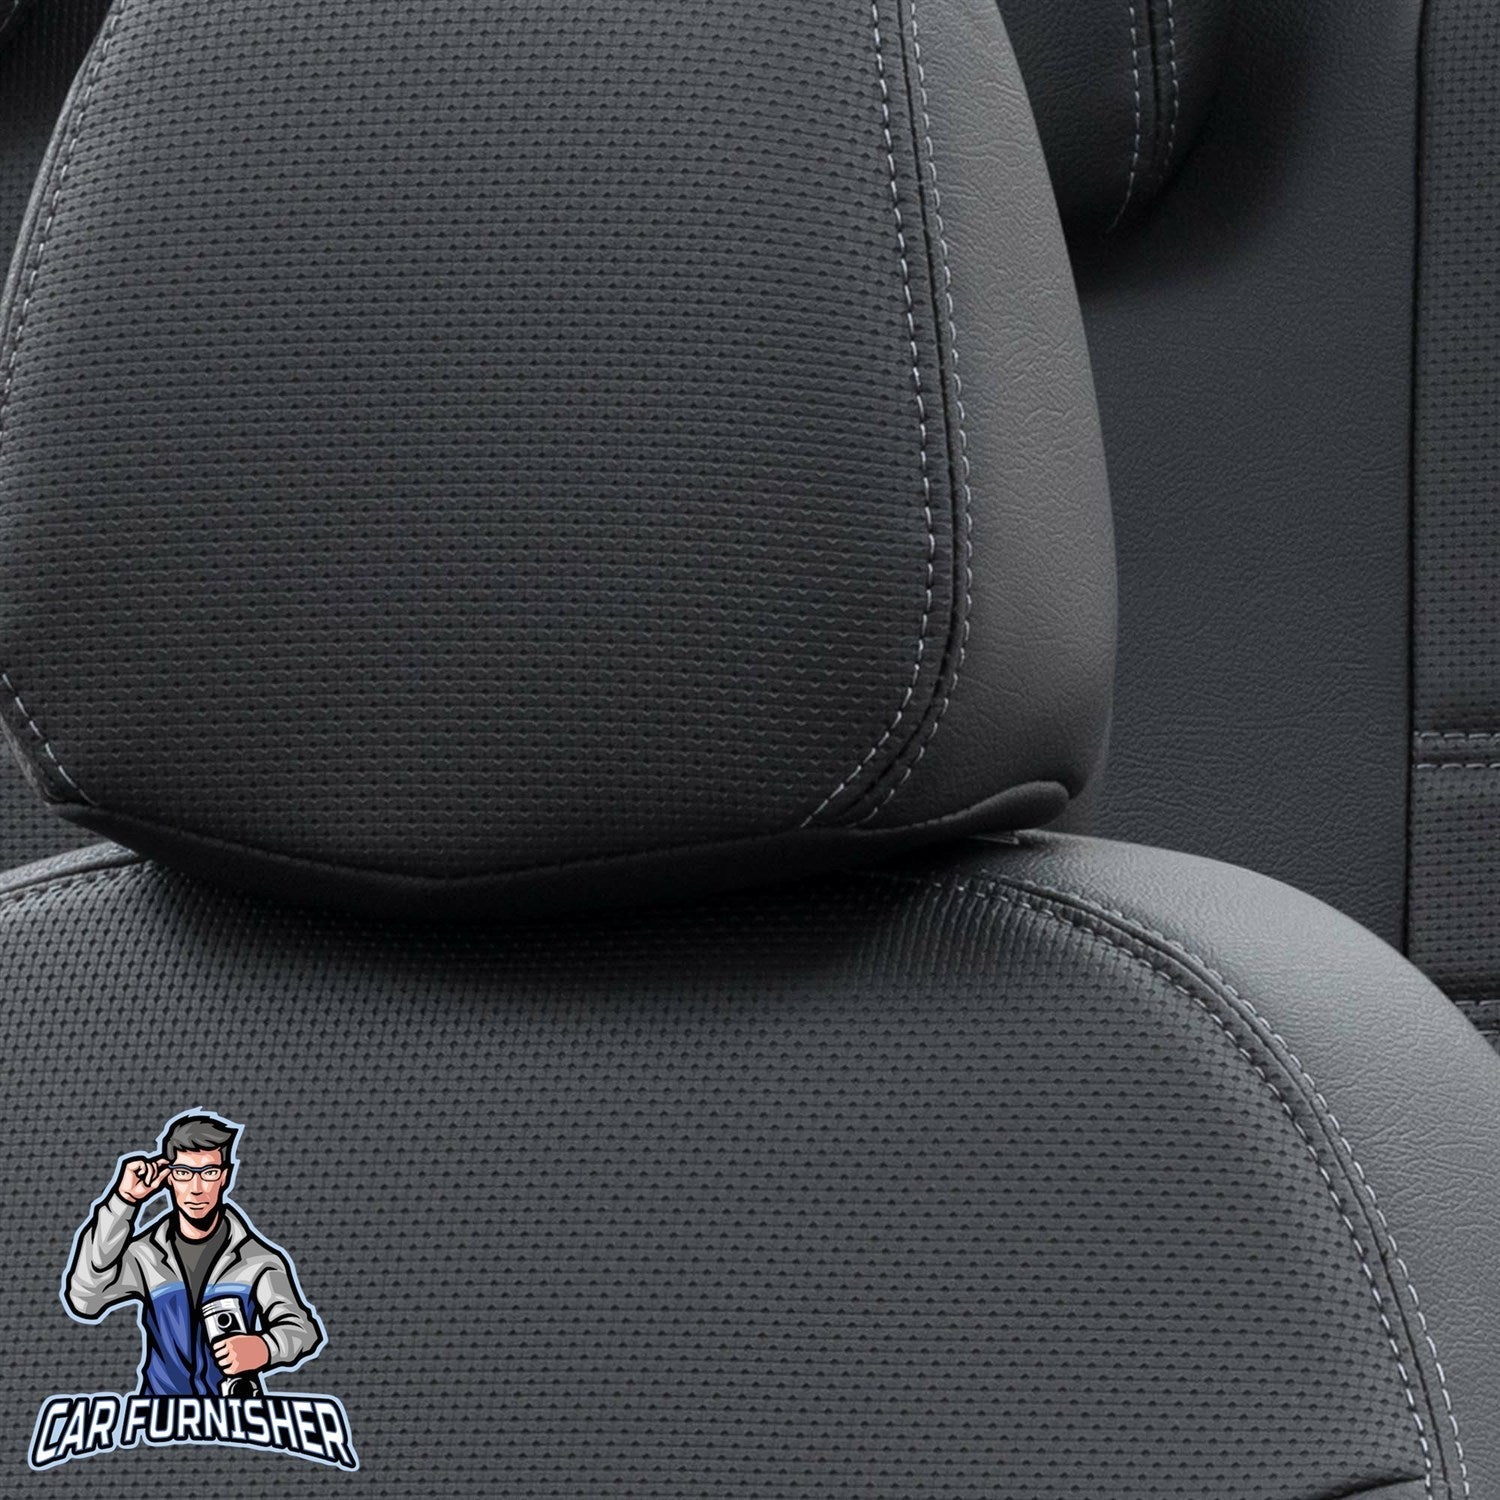 Fiat Fiorino Seat Covers New York Leather Design Black Leather